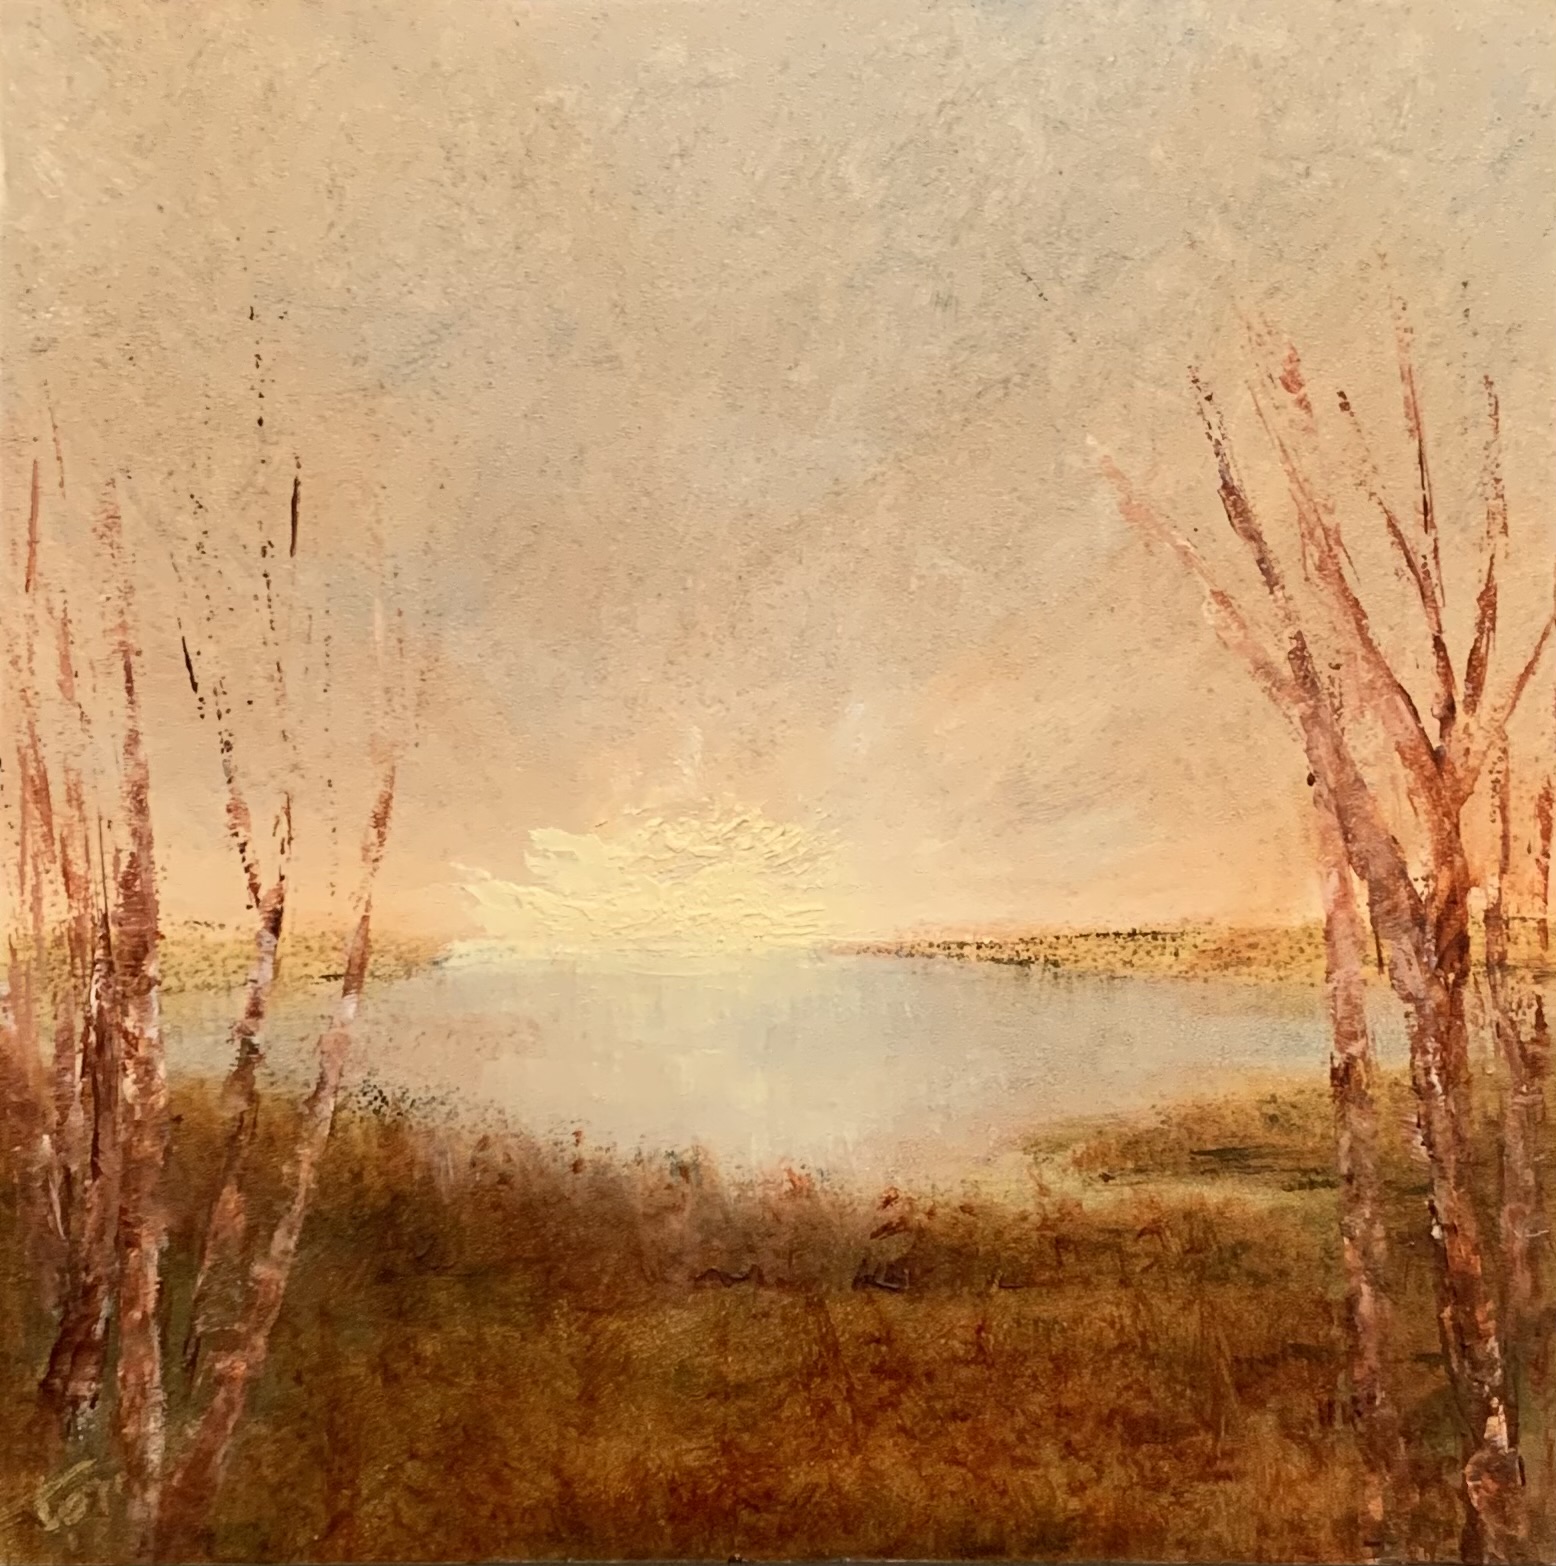 Original oil painting by Tisha Mark, Week 4, 52 Weeks of Finding Light Series, 6"x6" oil on Gessobord (2023). Painting shows a softly lit sunrise or sunset sky with sunlight at the horizon subtly reflecting in the water of a cove. Trees on both sides of the foreground frame the scene.